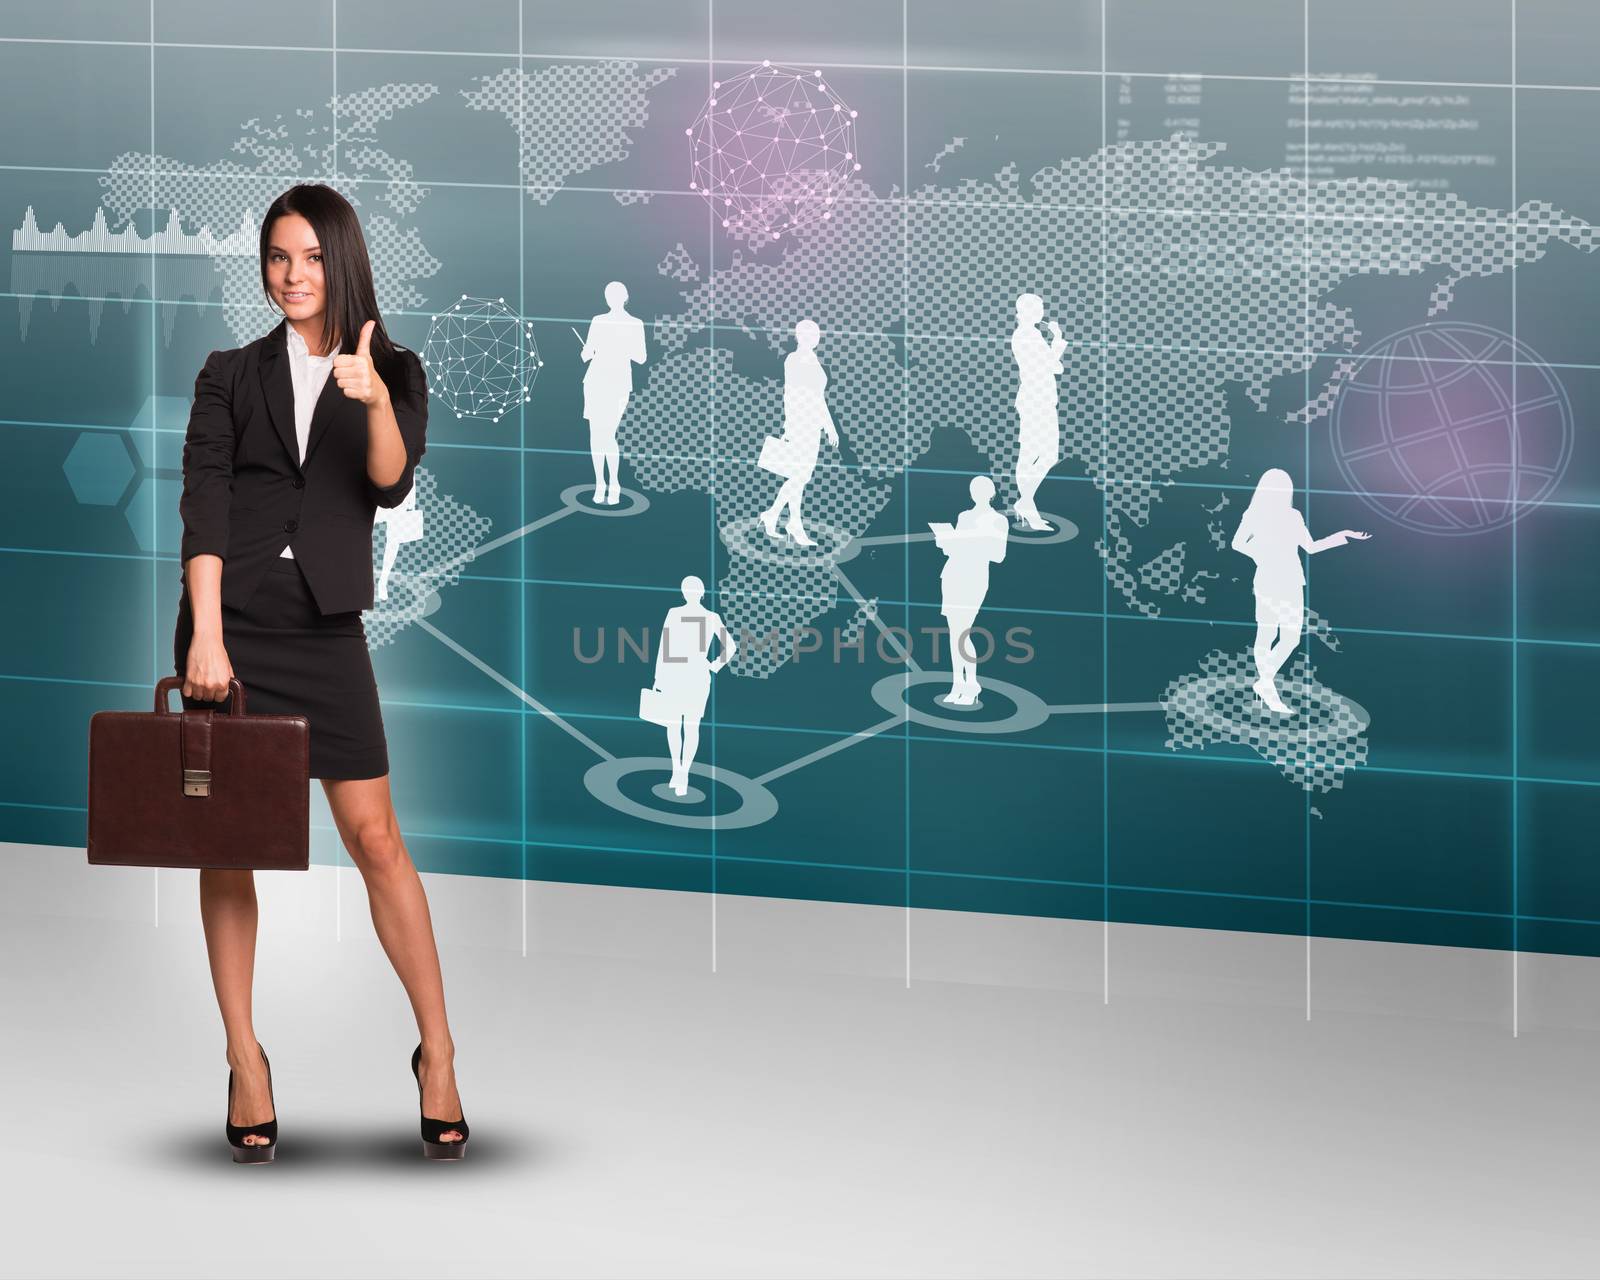 Businesswoman with suitcase showing ok on abstract background with world map